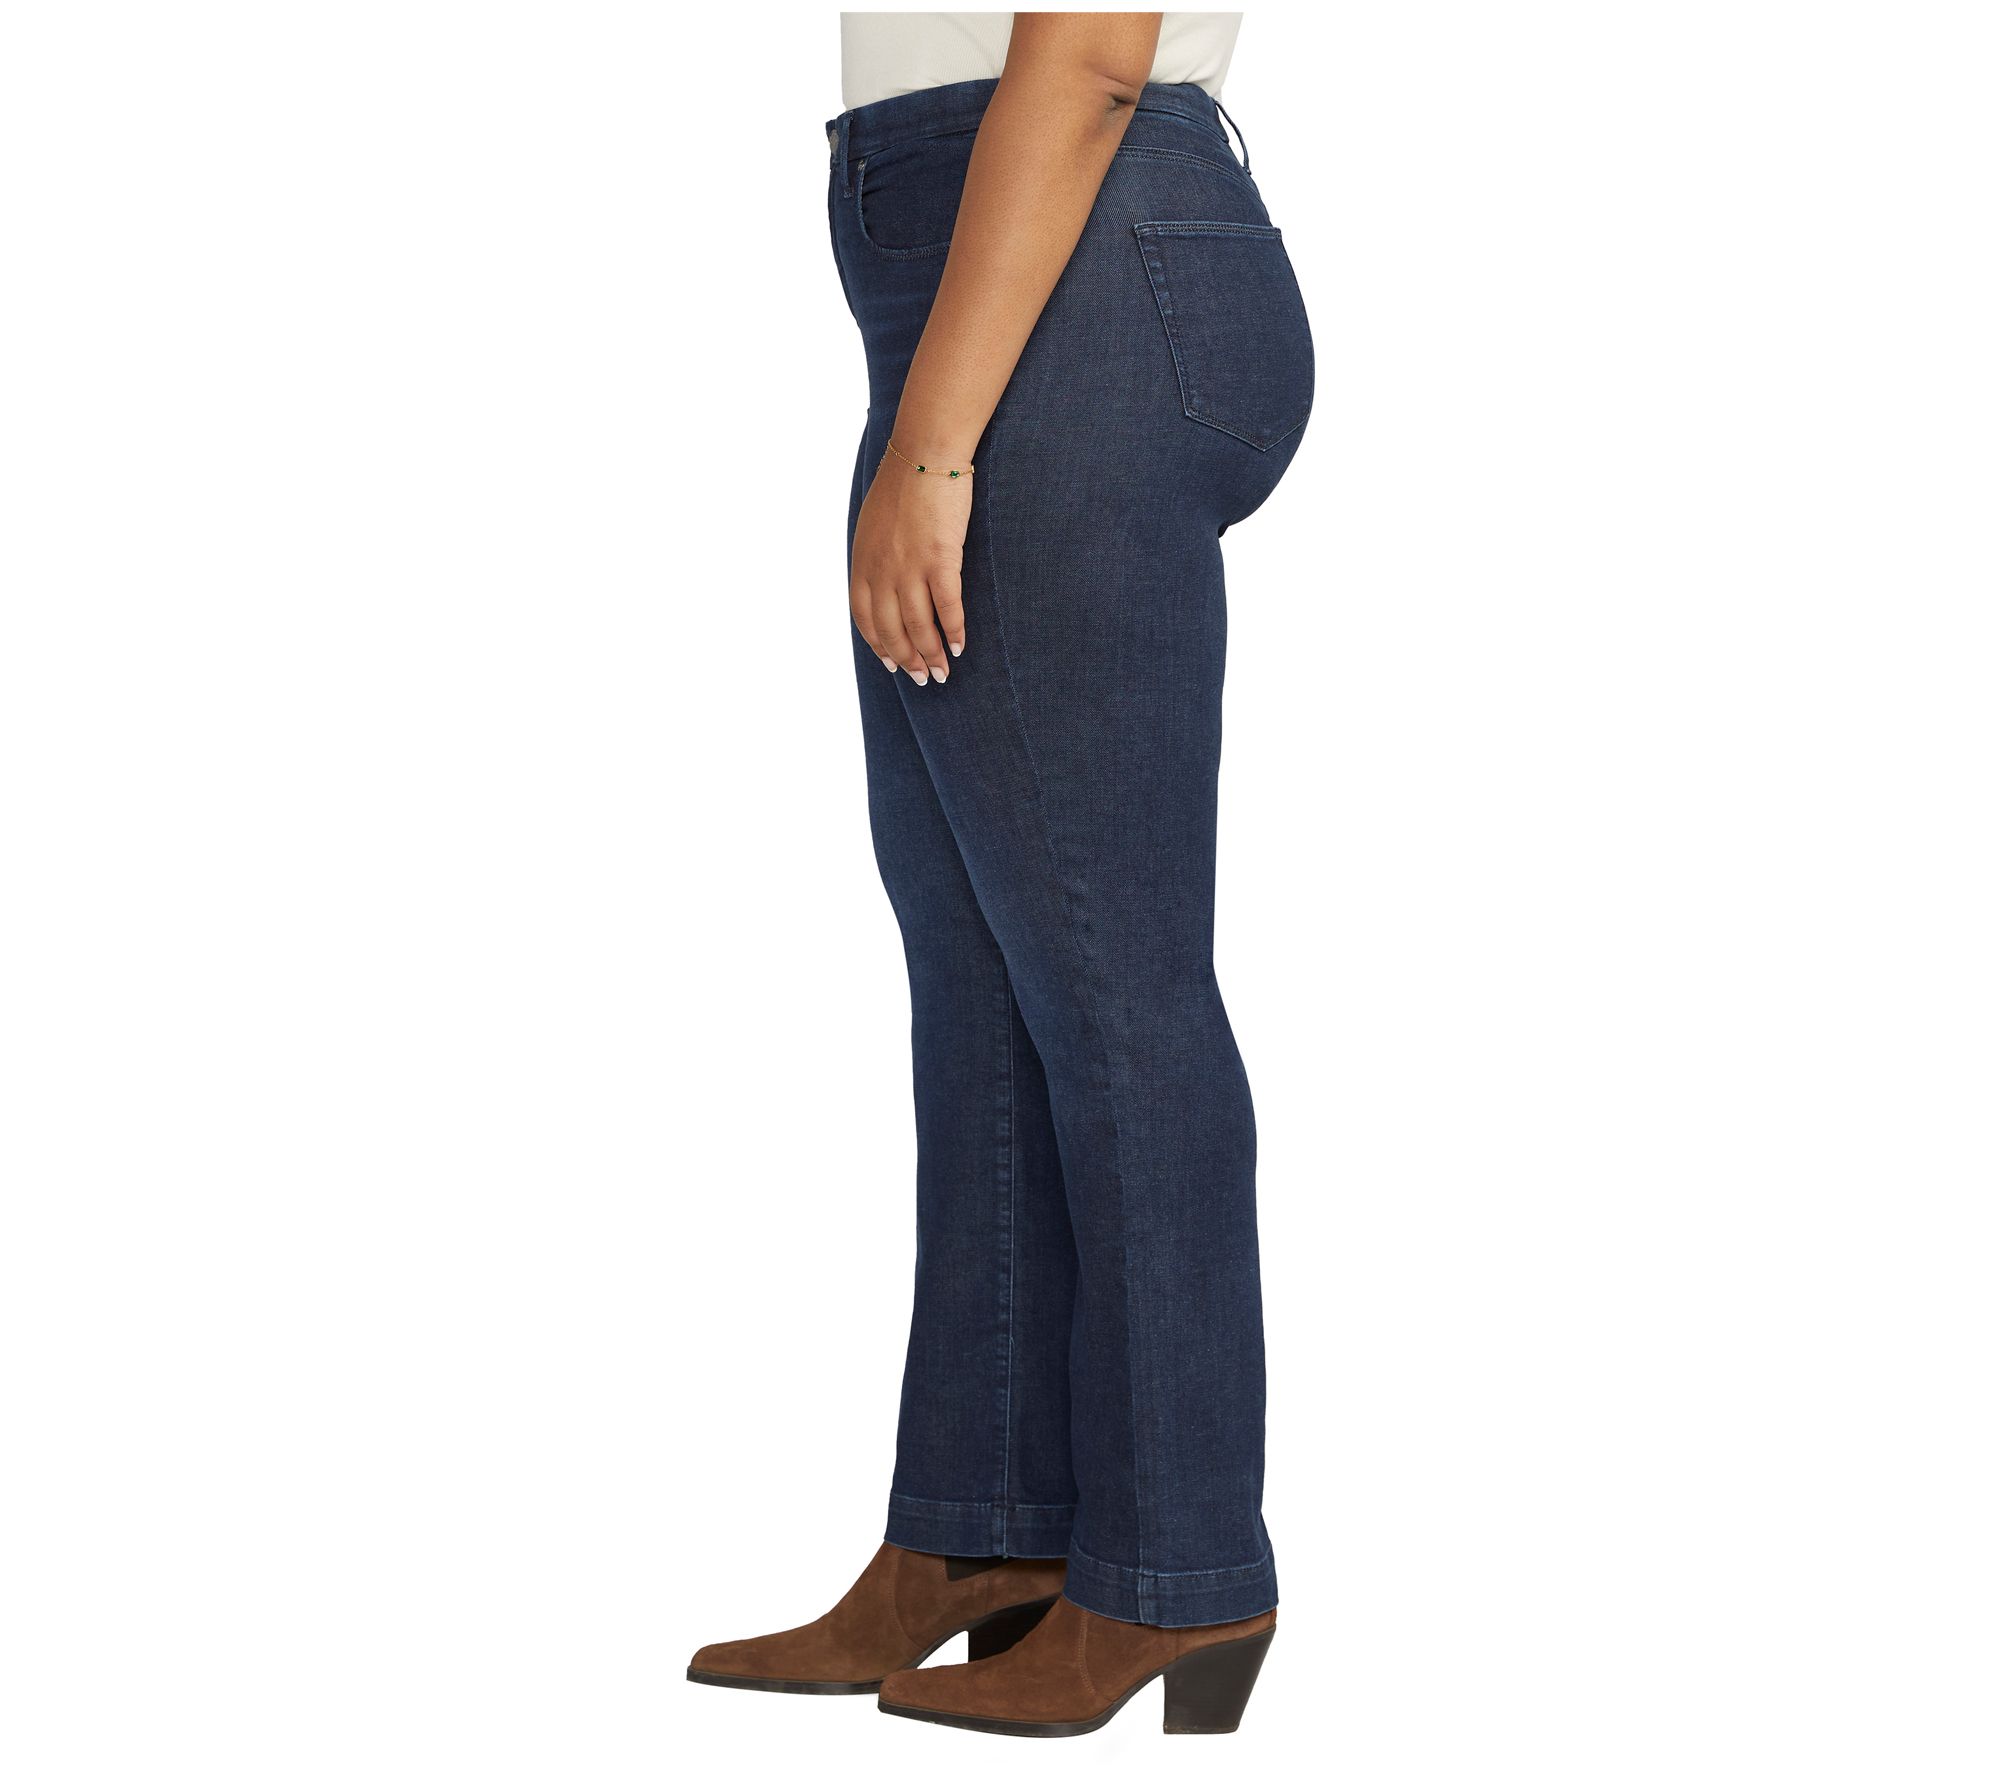 Jag Jeans Plus Size Phoebe High-Rise Bootcut Jeans